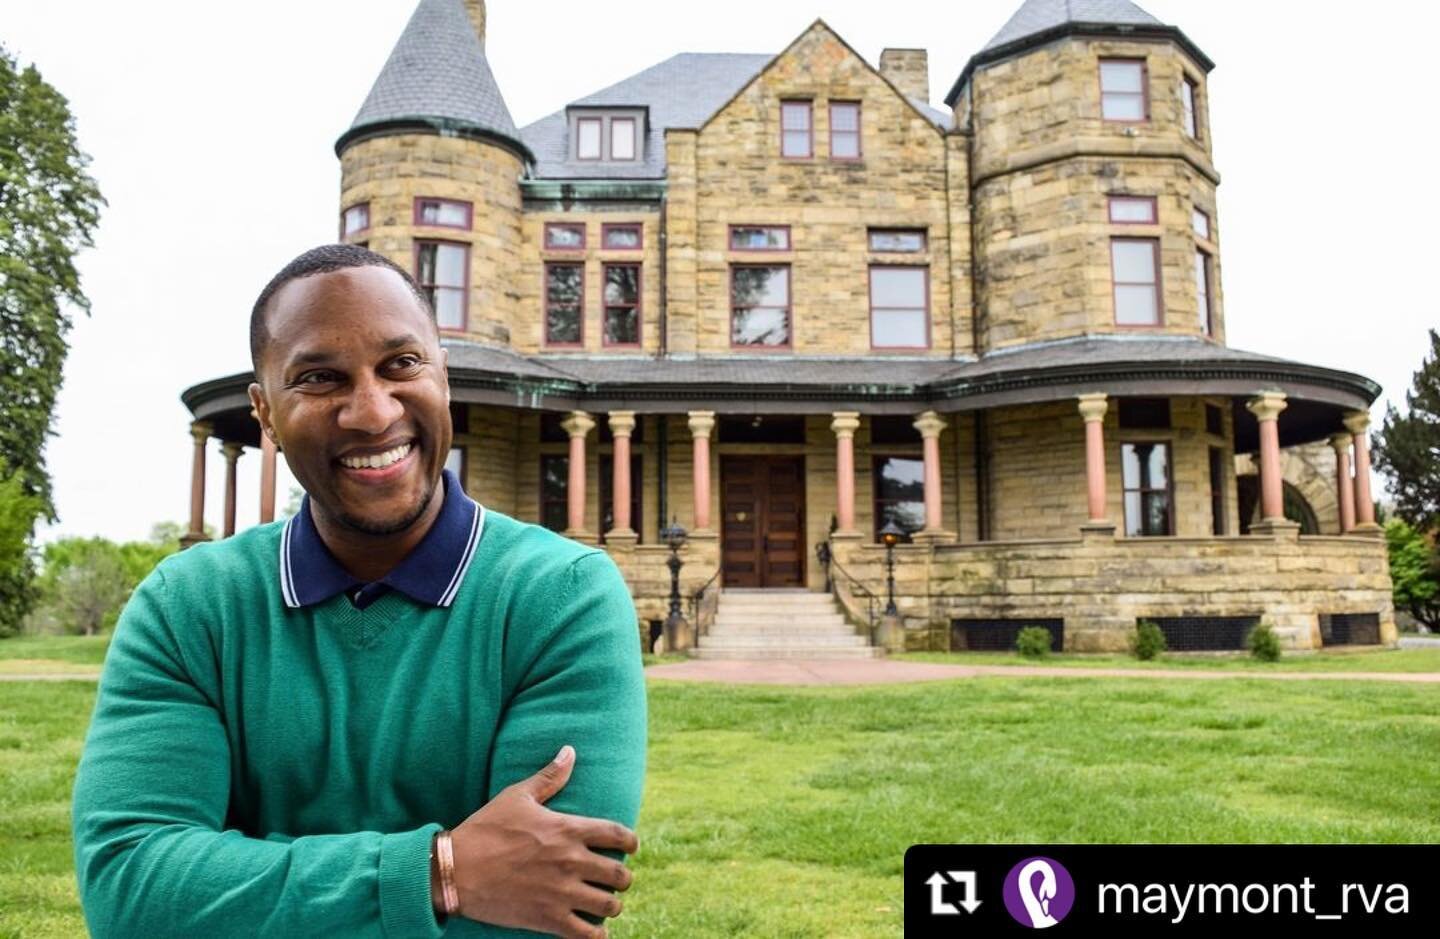 Hey! Check out this profile about the work I&rsquo;ve been doing at Maymont!
See below!
⬇️⬇️⬇️⬇️⬇️⬇️⬇️⬇️⬇️⬇️⬇️⬇️⬇️⬇️
#Repost @maymont_rva with @make_repost
・・・
💬 &quot;We&rsquo;d be doing a disservice to the history of the property, essentially, if 